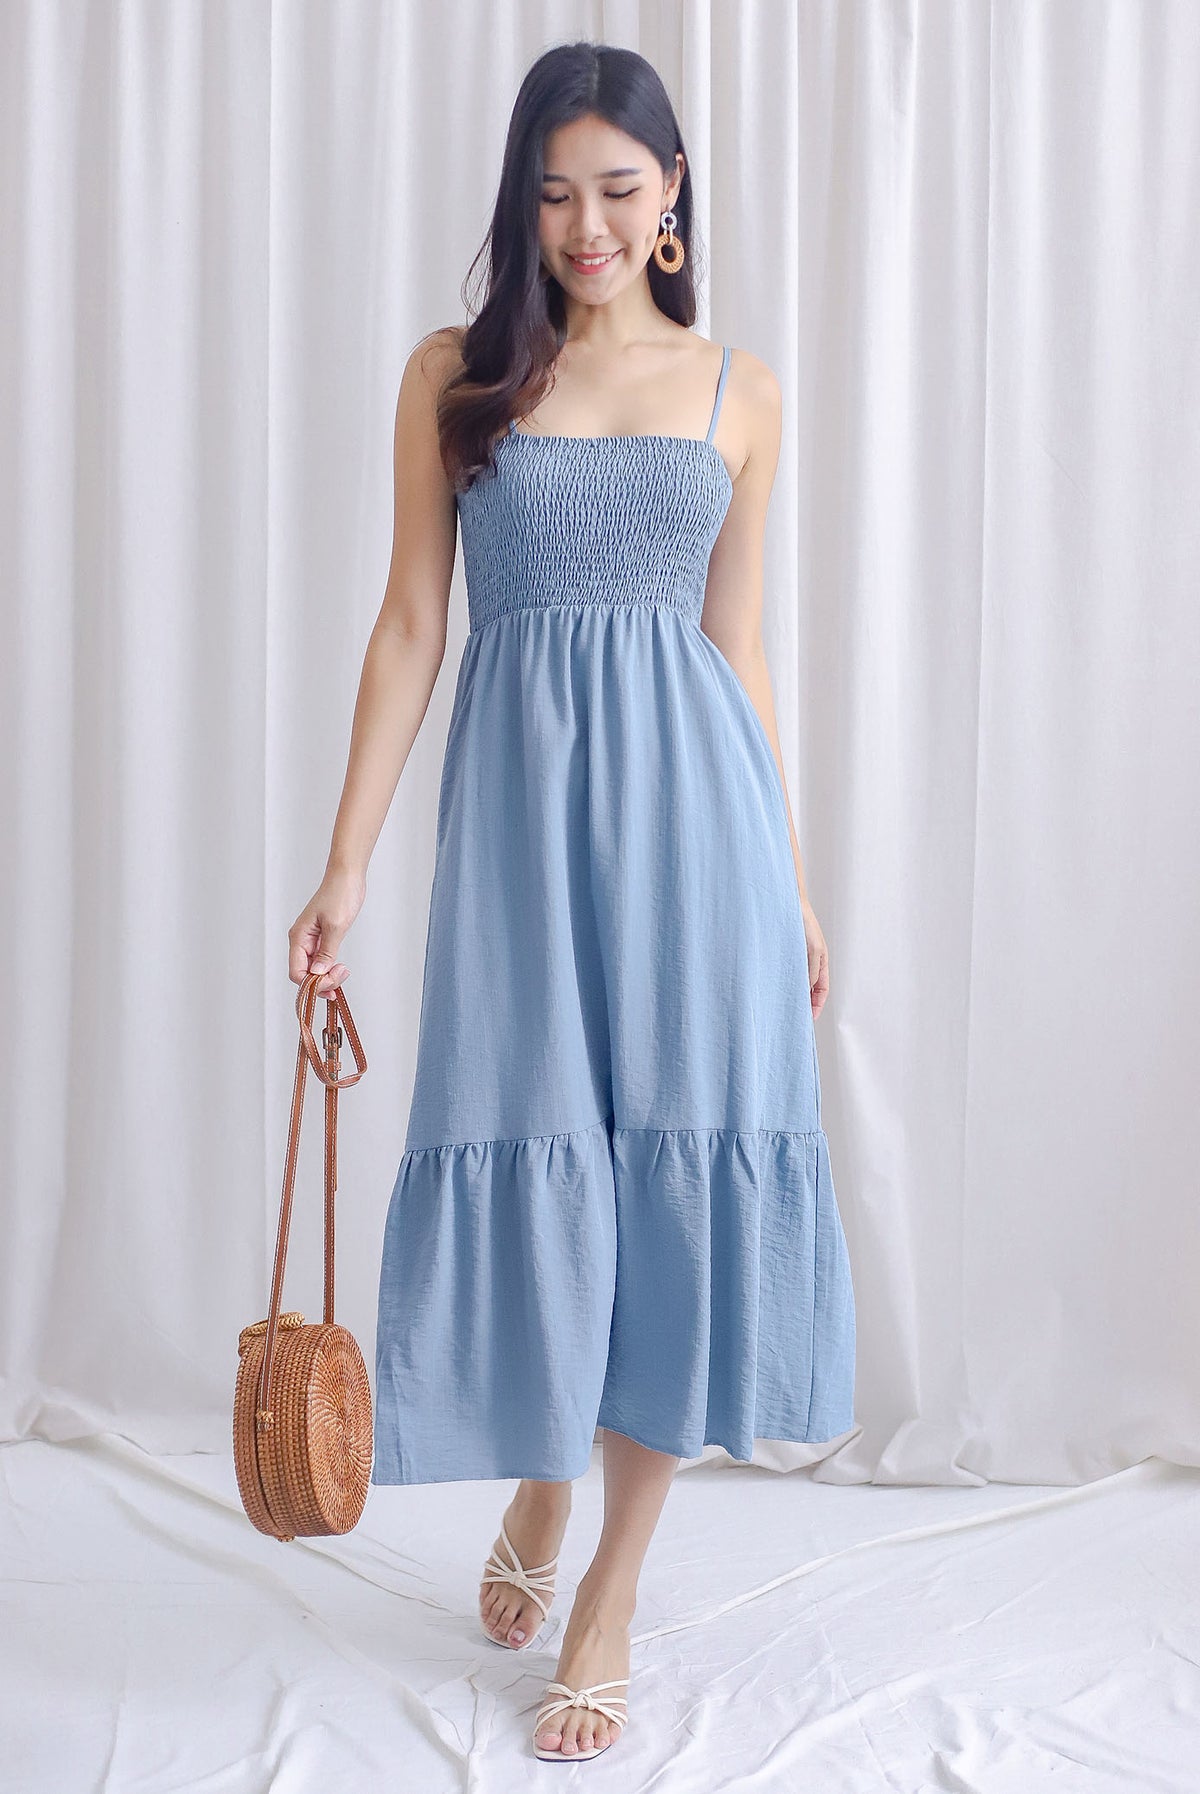 Panel flare dress (Trending style) with kiss pleat strap by Semasa  Clothing